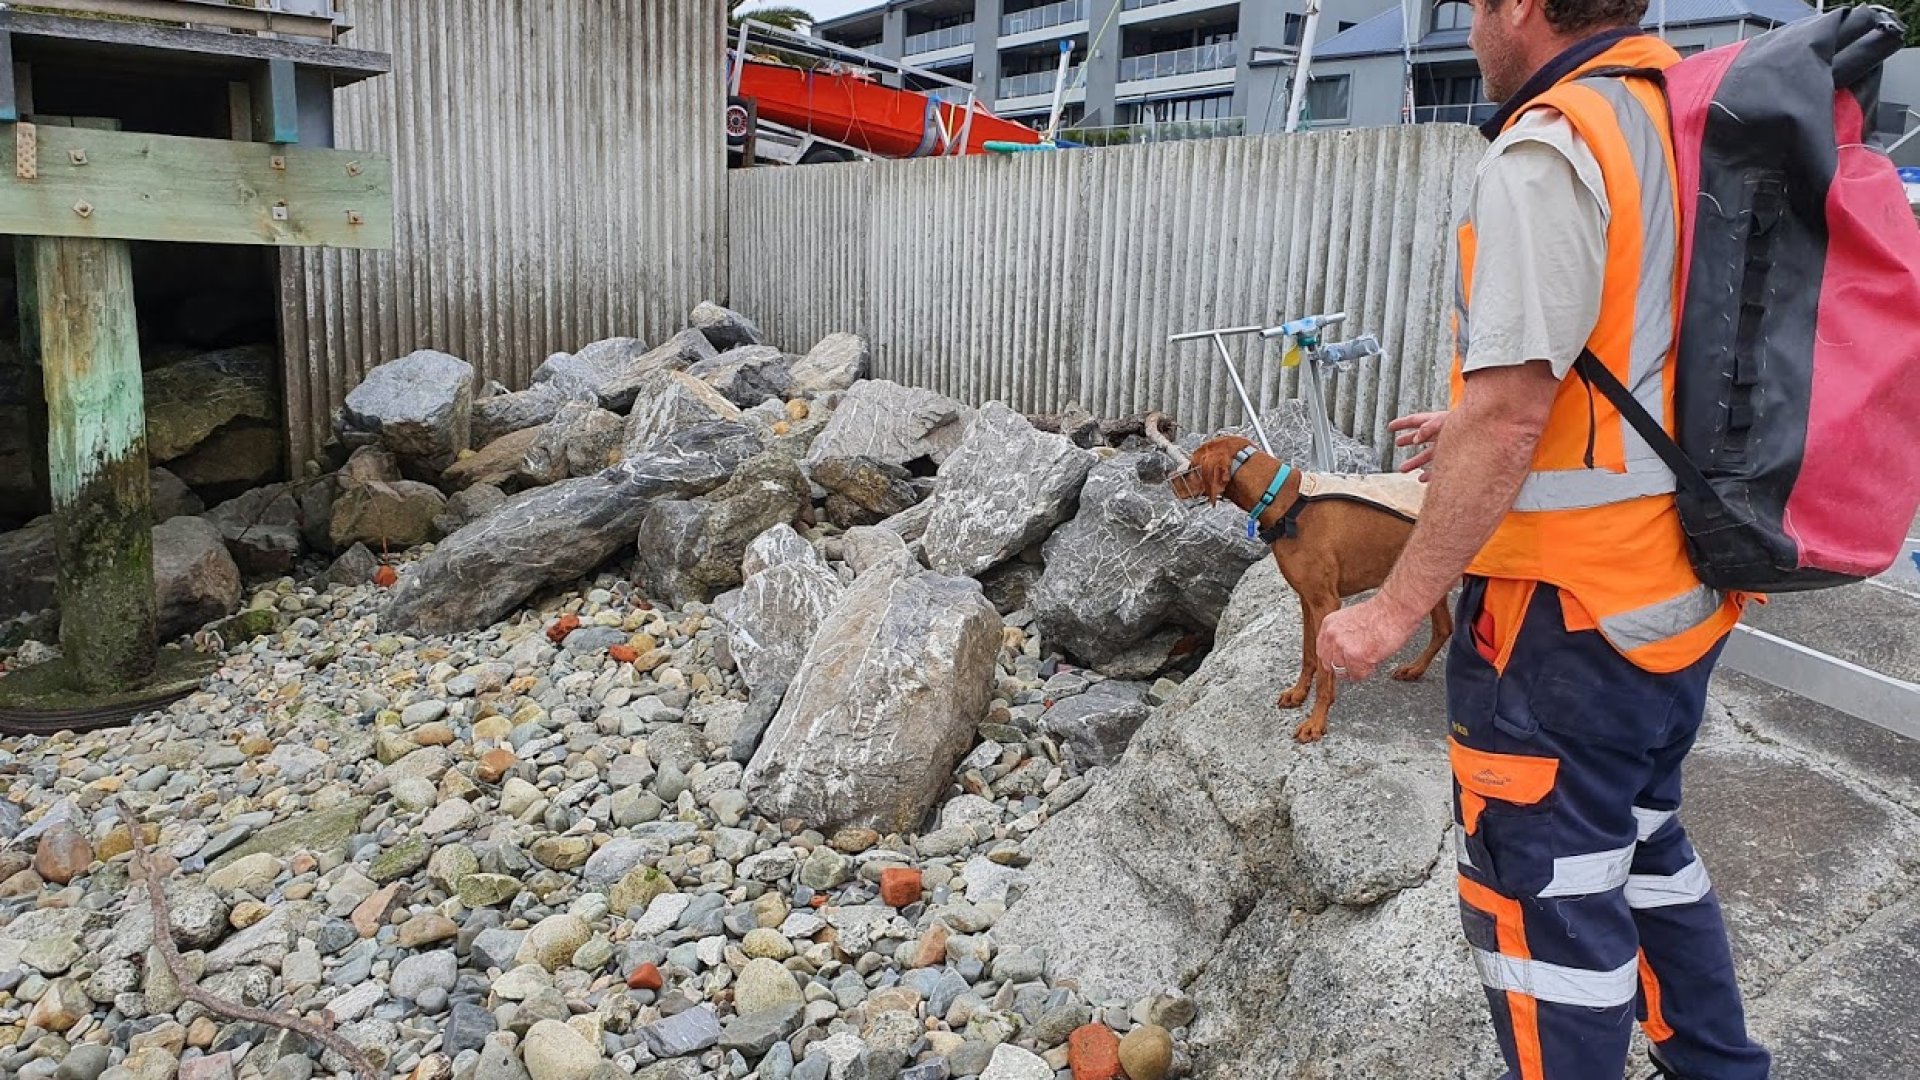 Alastair Judkins and Mena at work sniffing out penguins along Rocks Road. Photo: Kaikoura Ocean Research Institute.